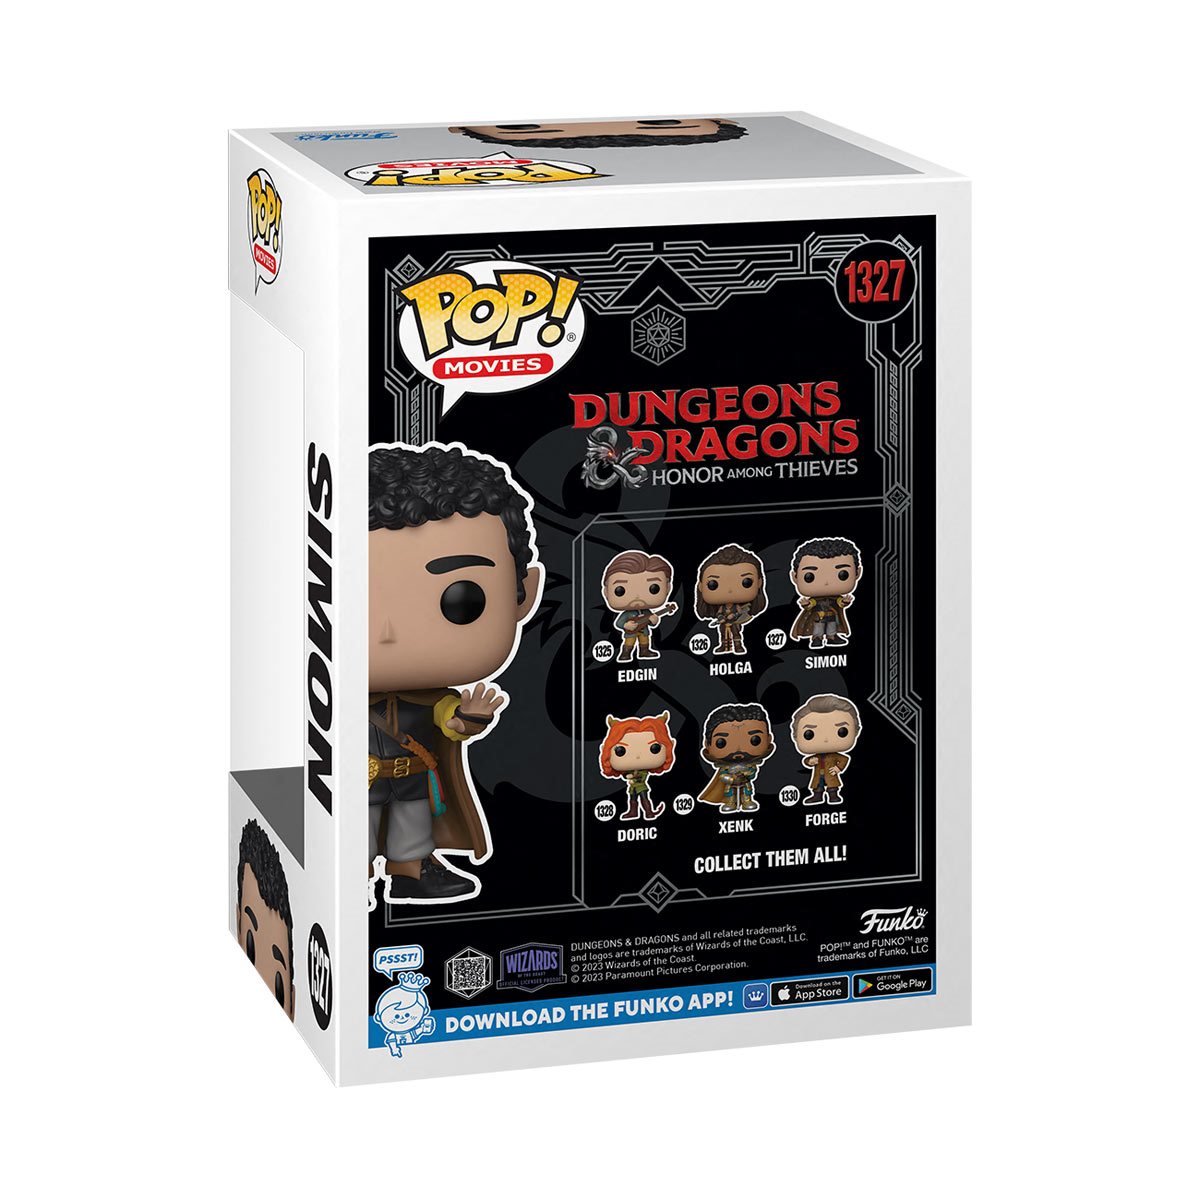 Funko Pop Movies: Dungeons And Dragons - Simon